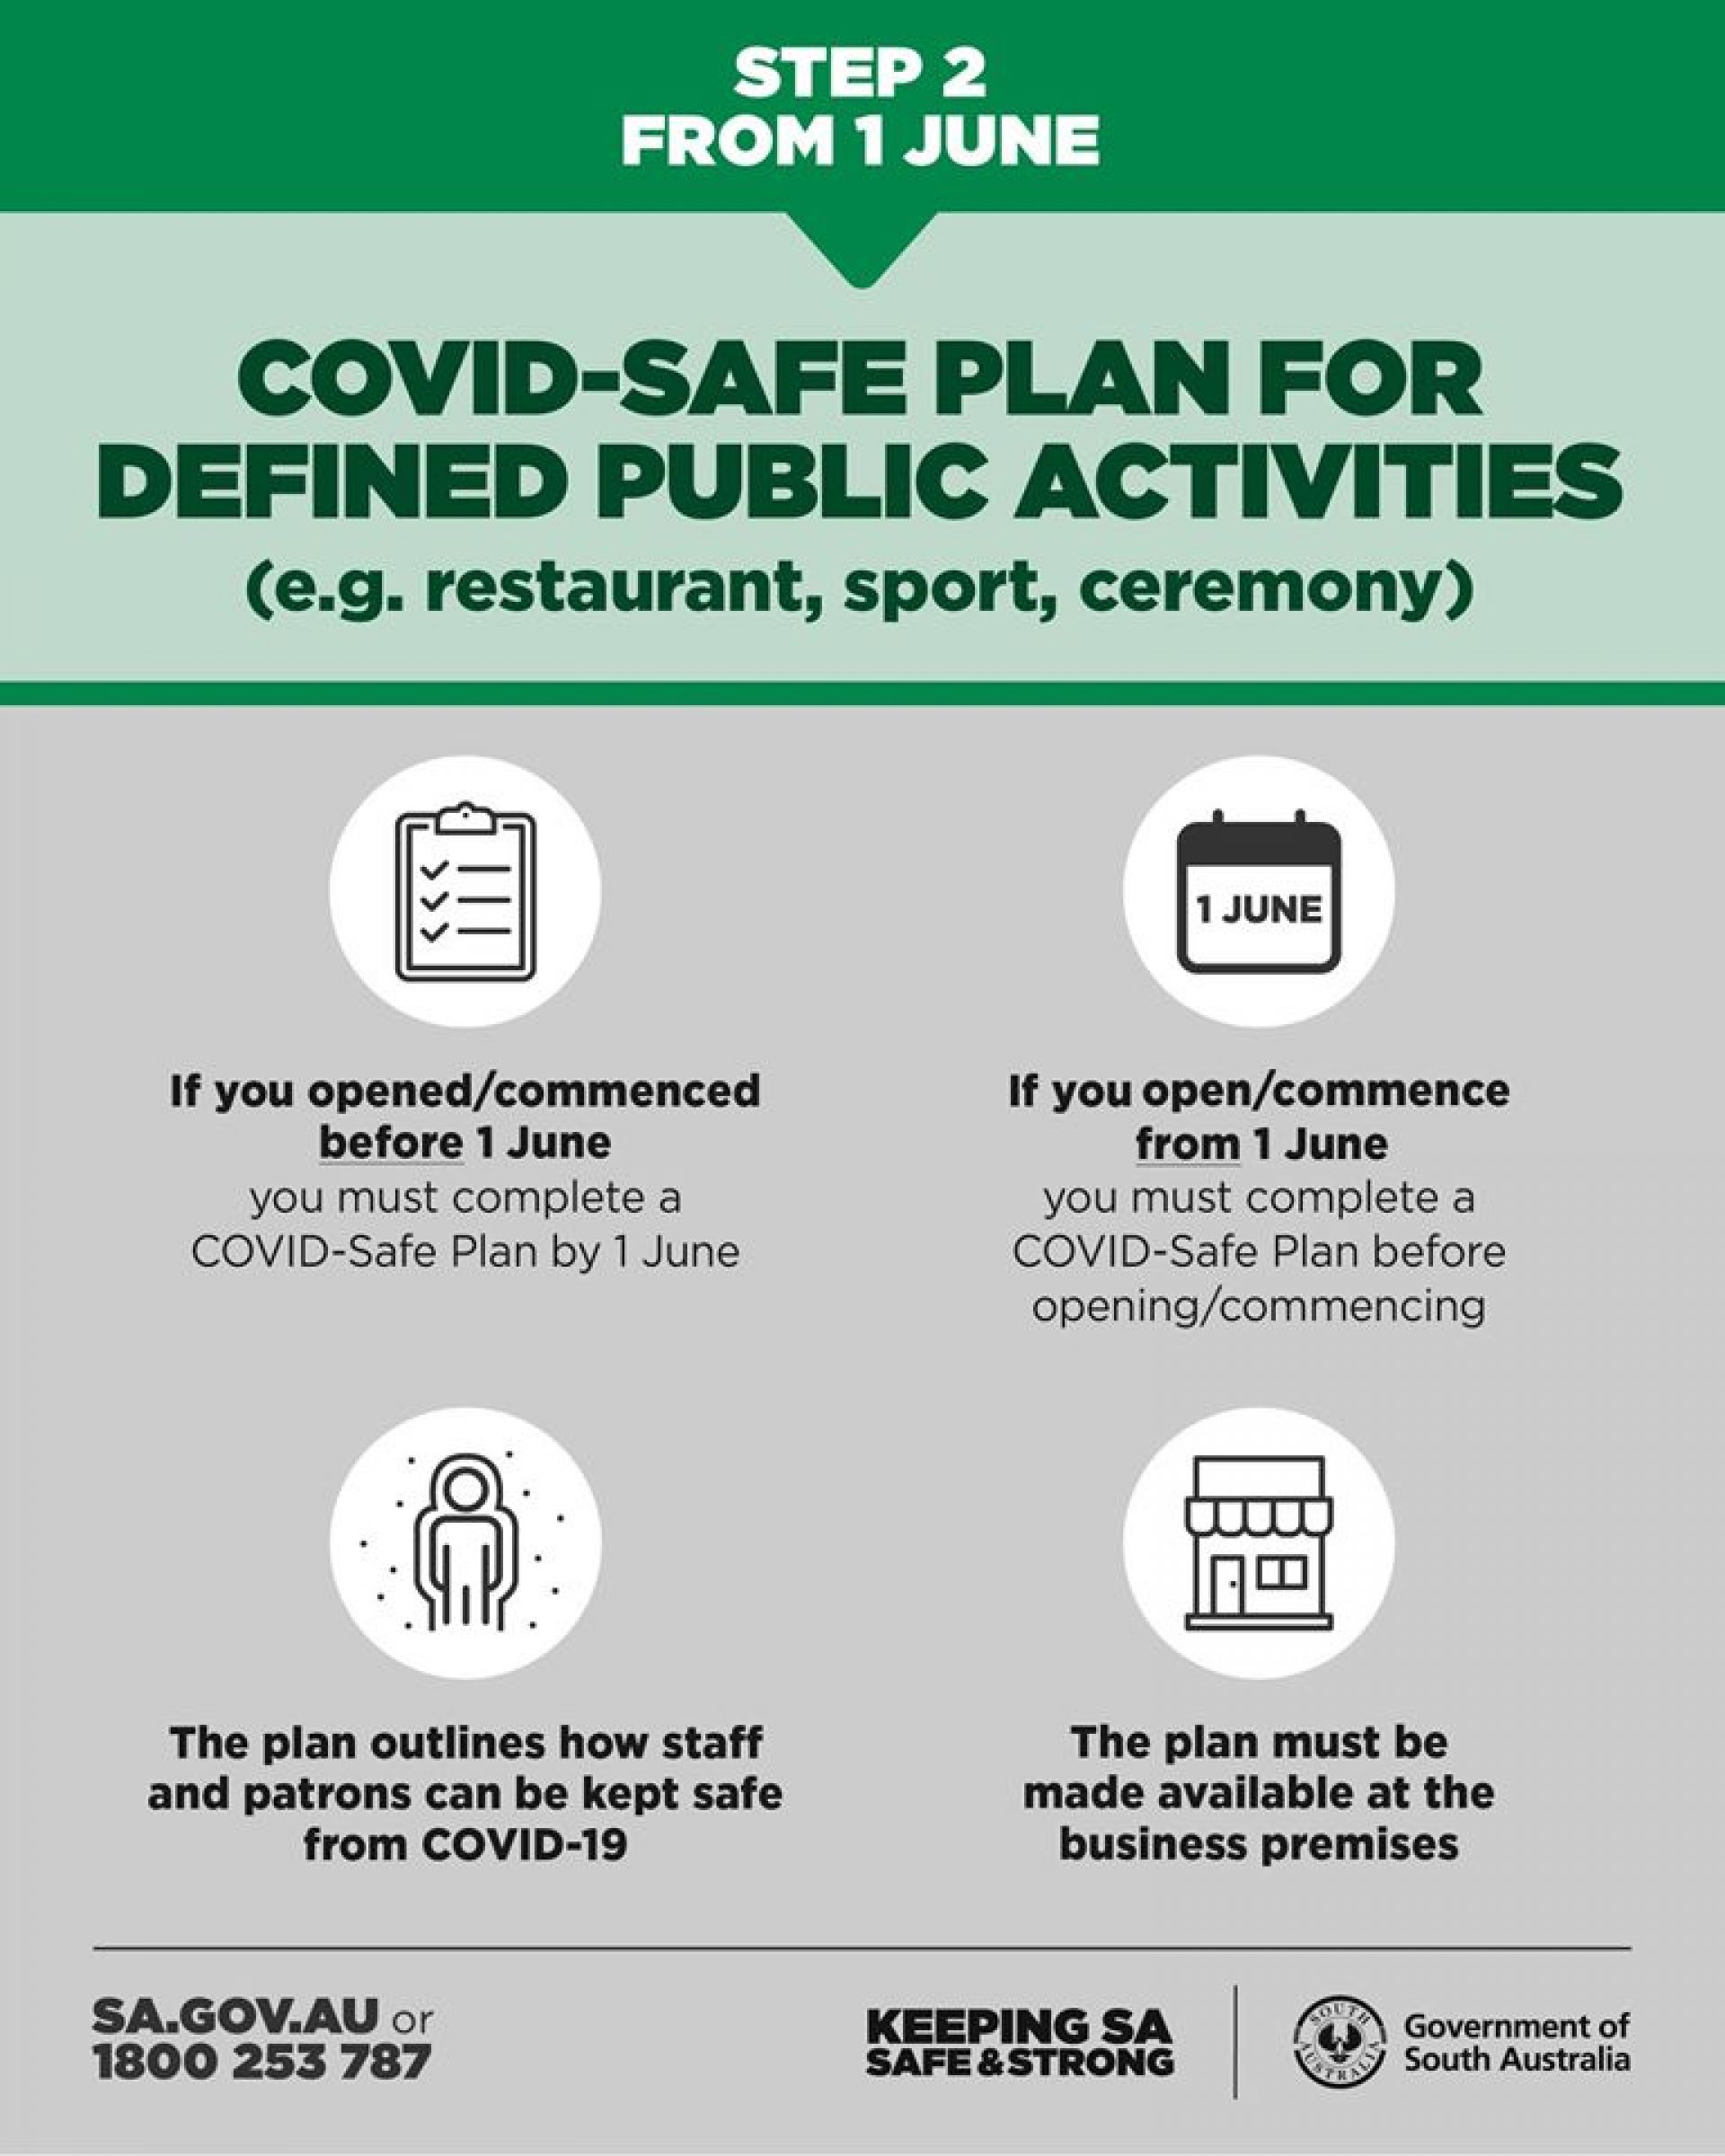 COVID-safe plan for defined public activities